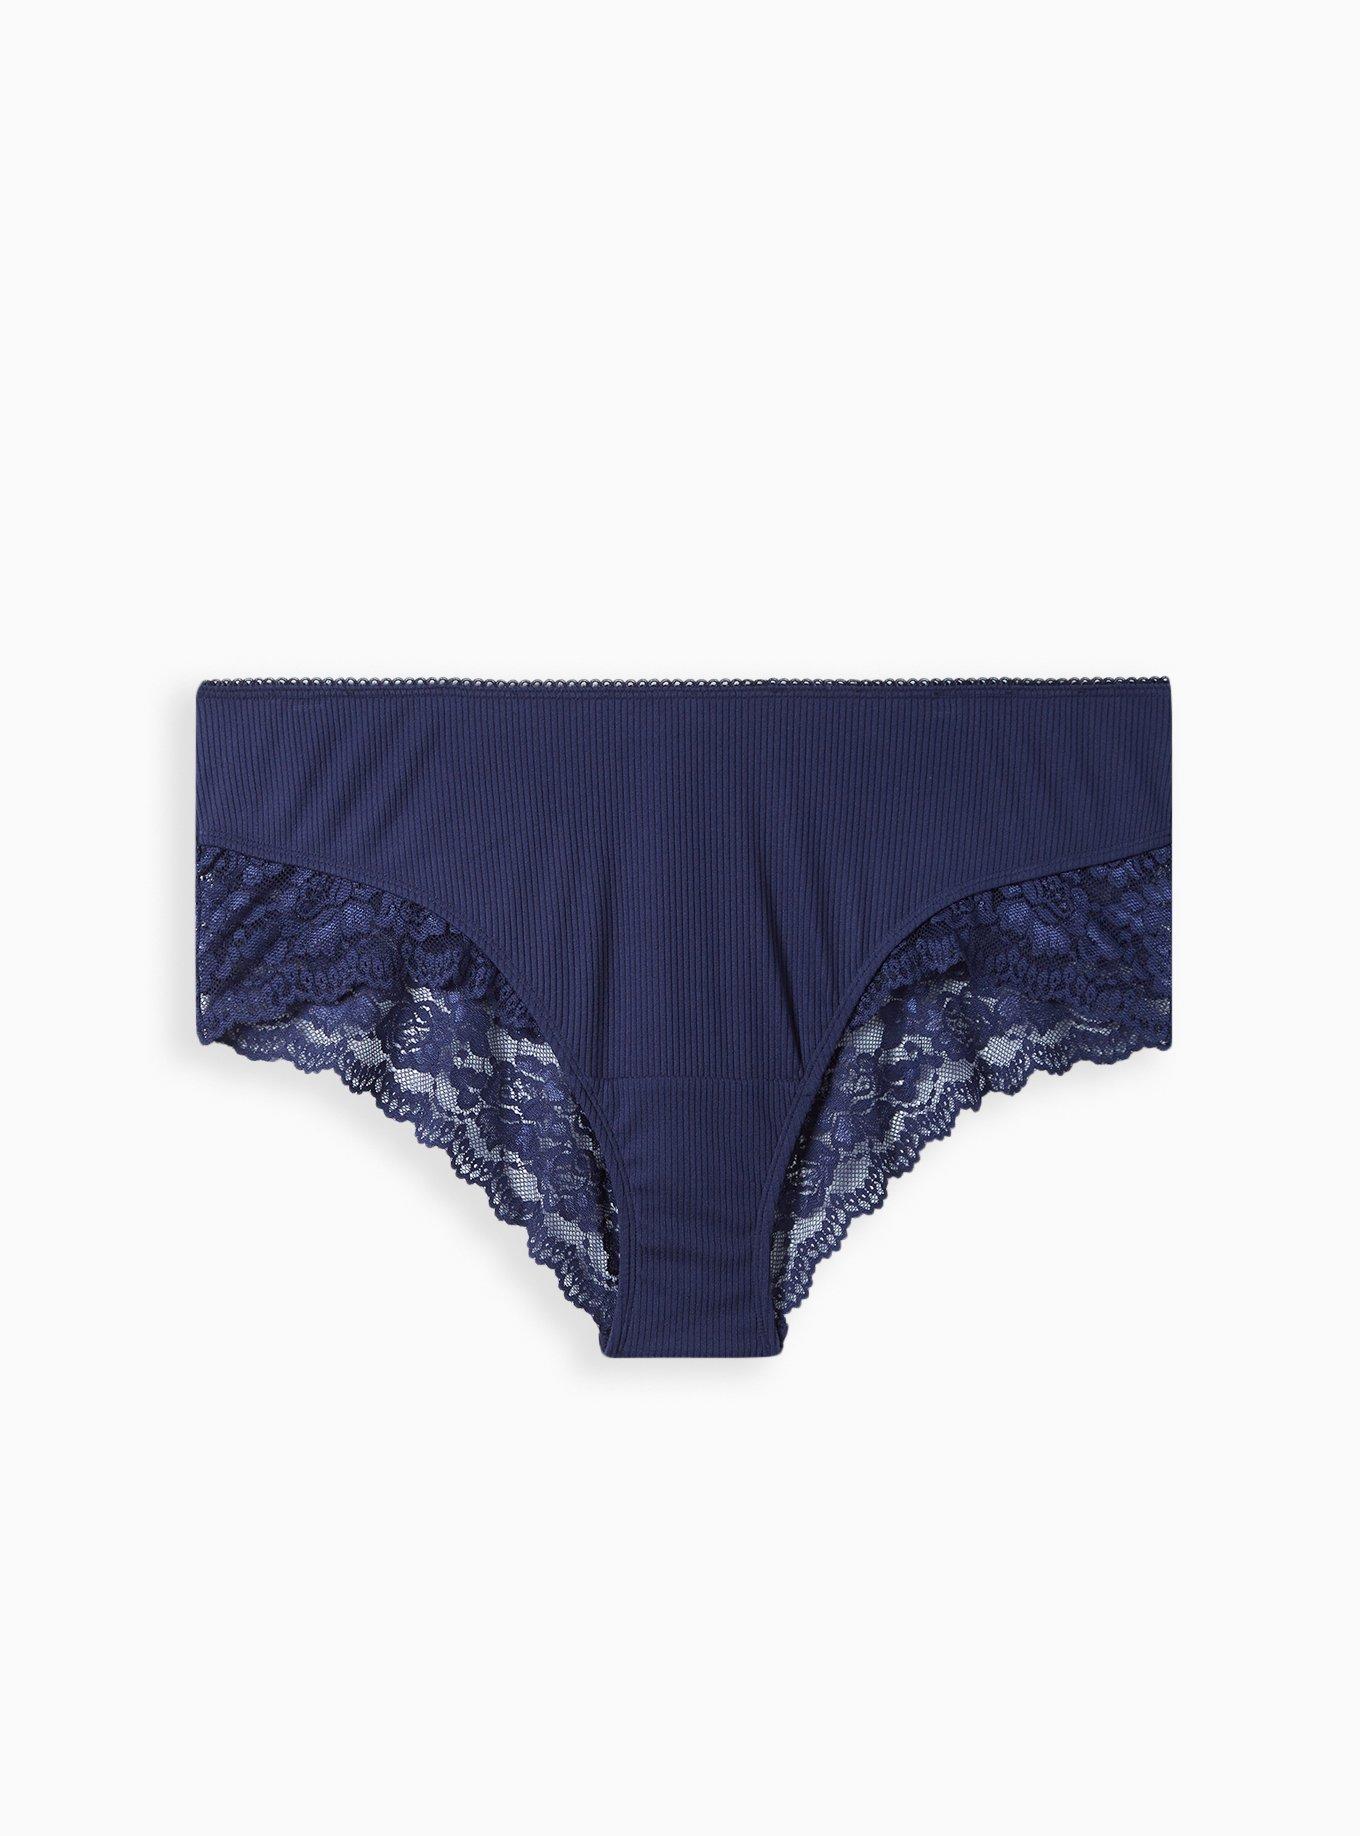 Favourites Lace Full Brief in Peacoat Navy